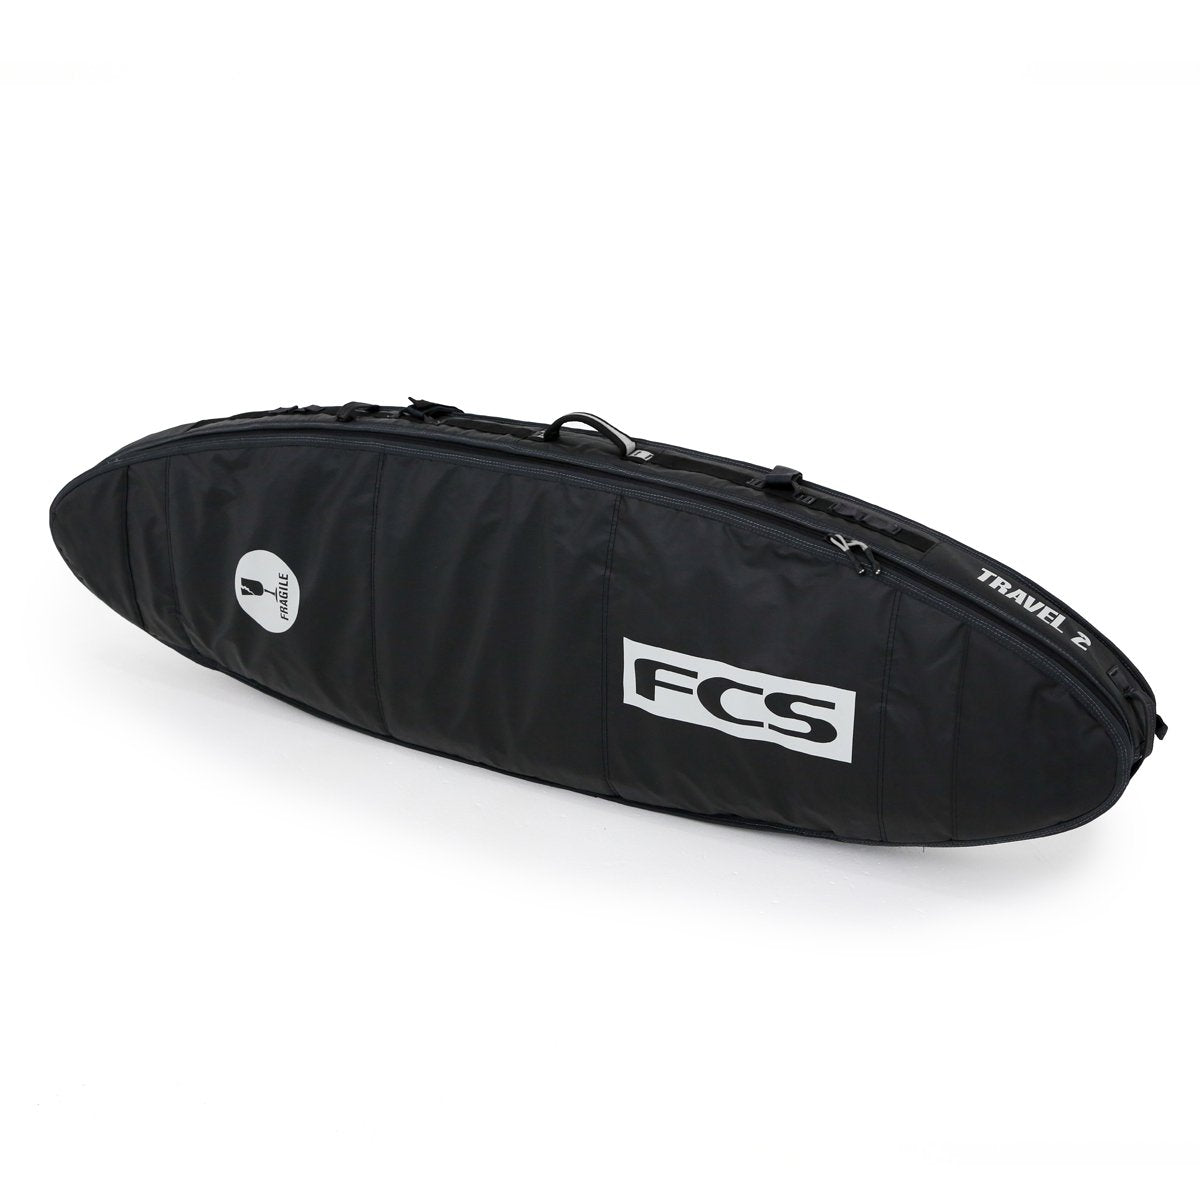 6'7” FCS Travel 2 All Purpose Surfboard Cover